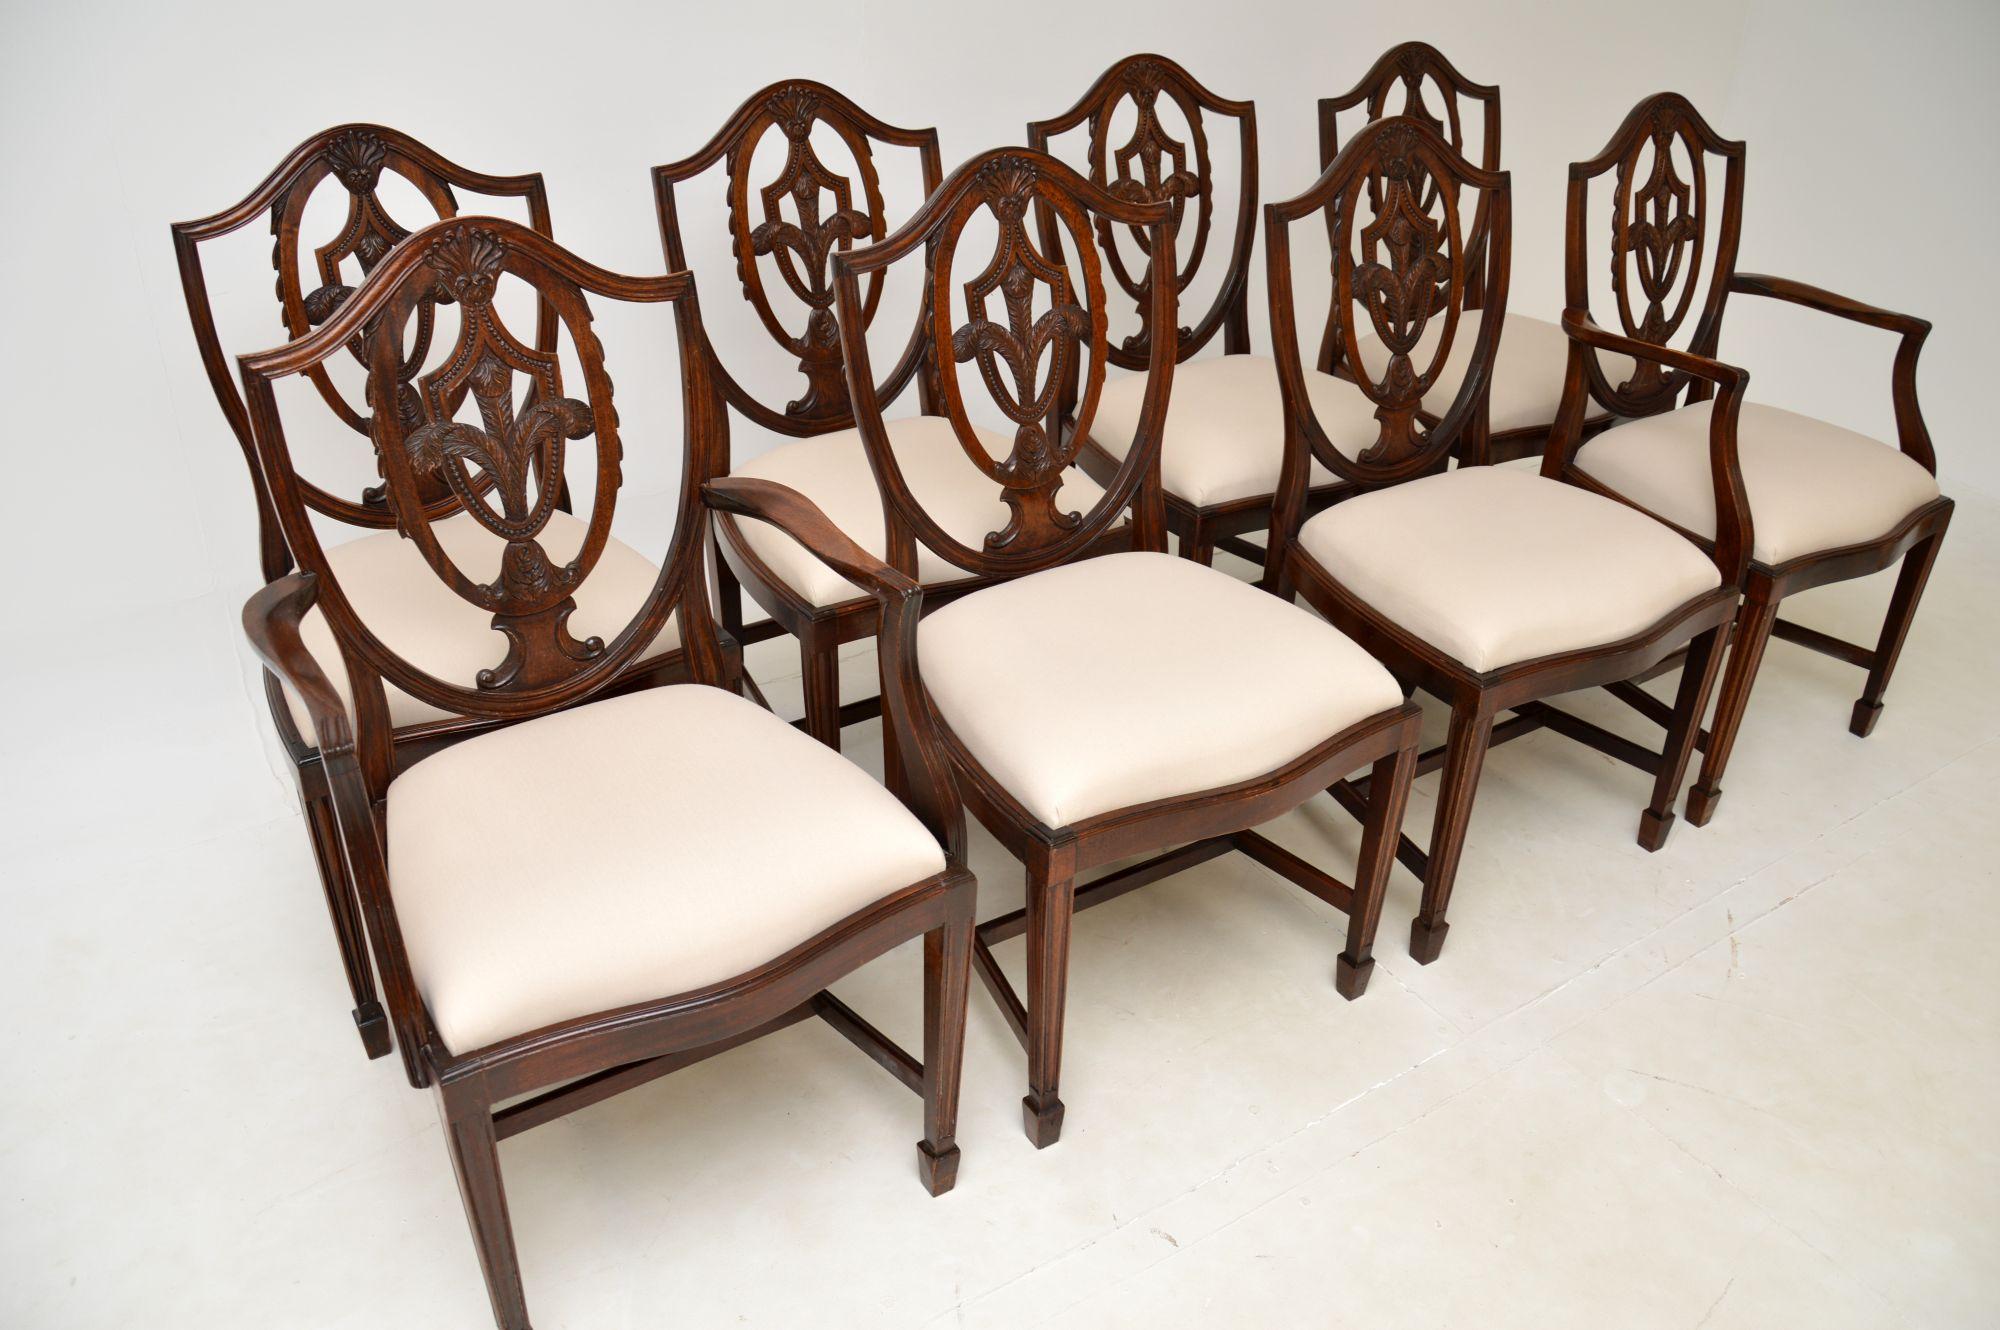 A lovely set of eight antique shield back dining chairs in the Sheraton style. They were made in England, and date from around the 1930’s.

The quality is superb, they have beautifully carved pierced back rests with Prince of Wales feather motifs.